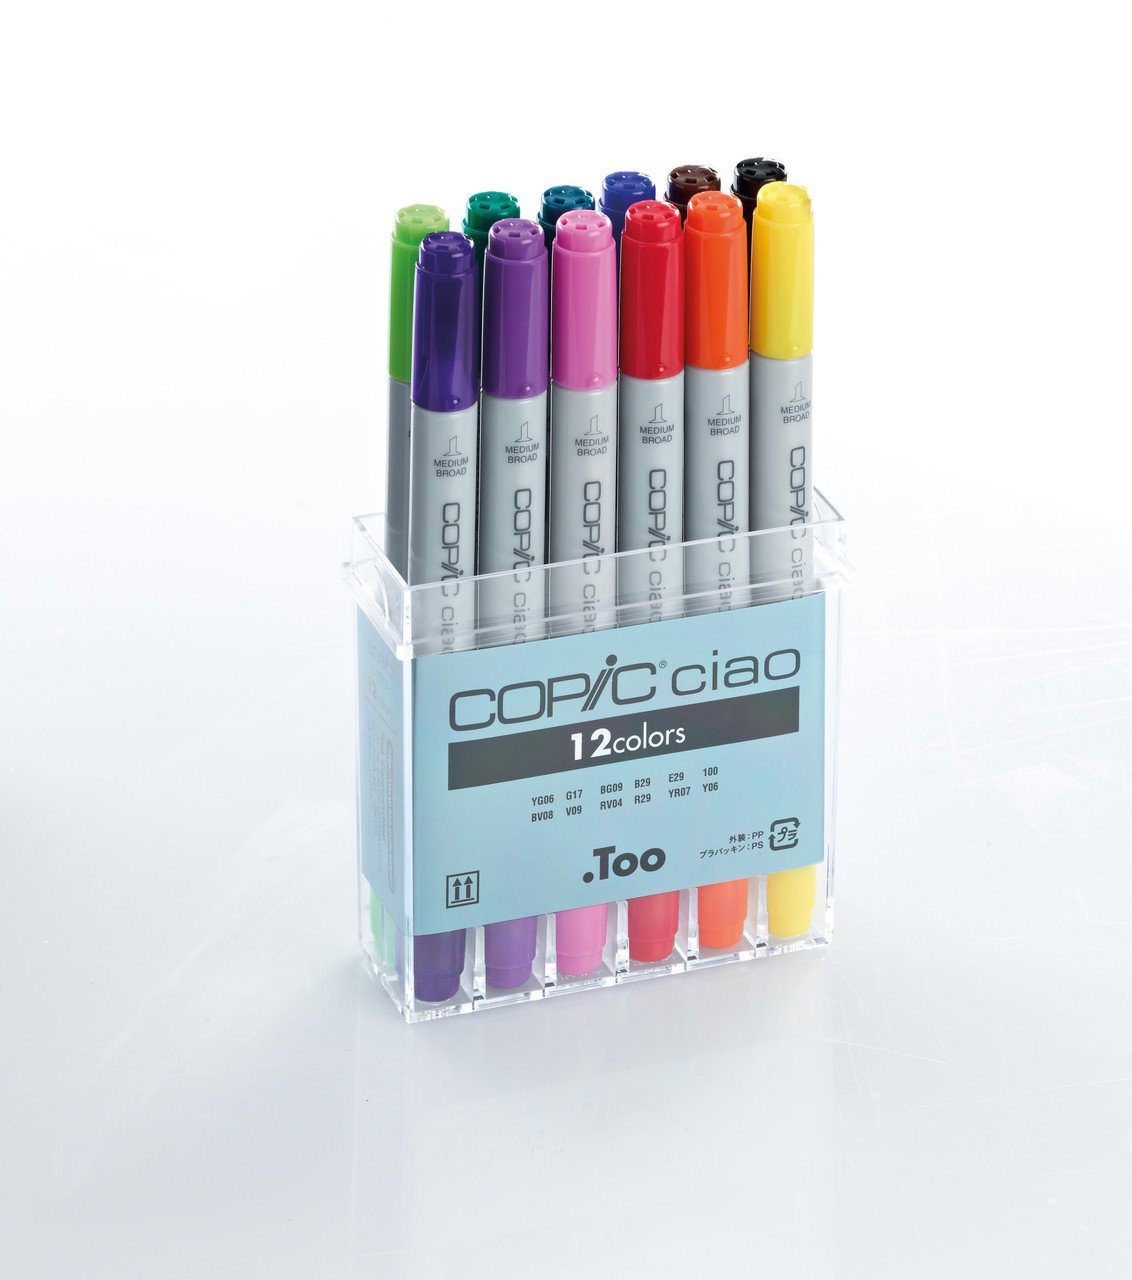 What are Copic Ciao Markers?